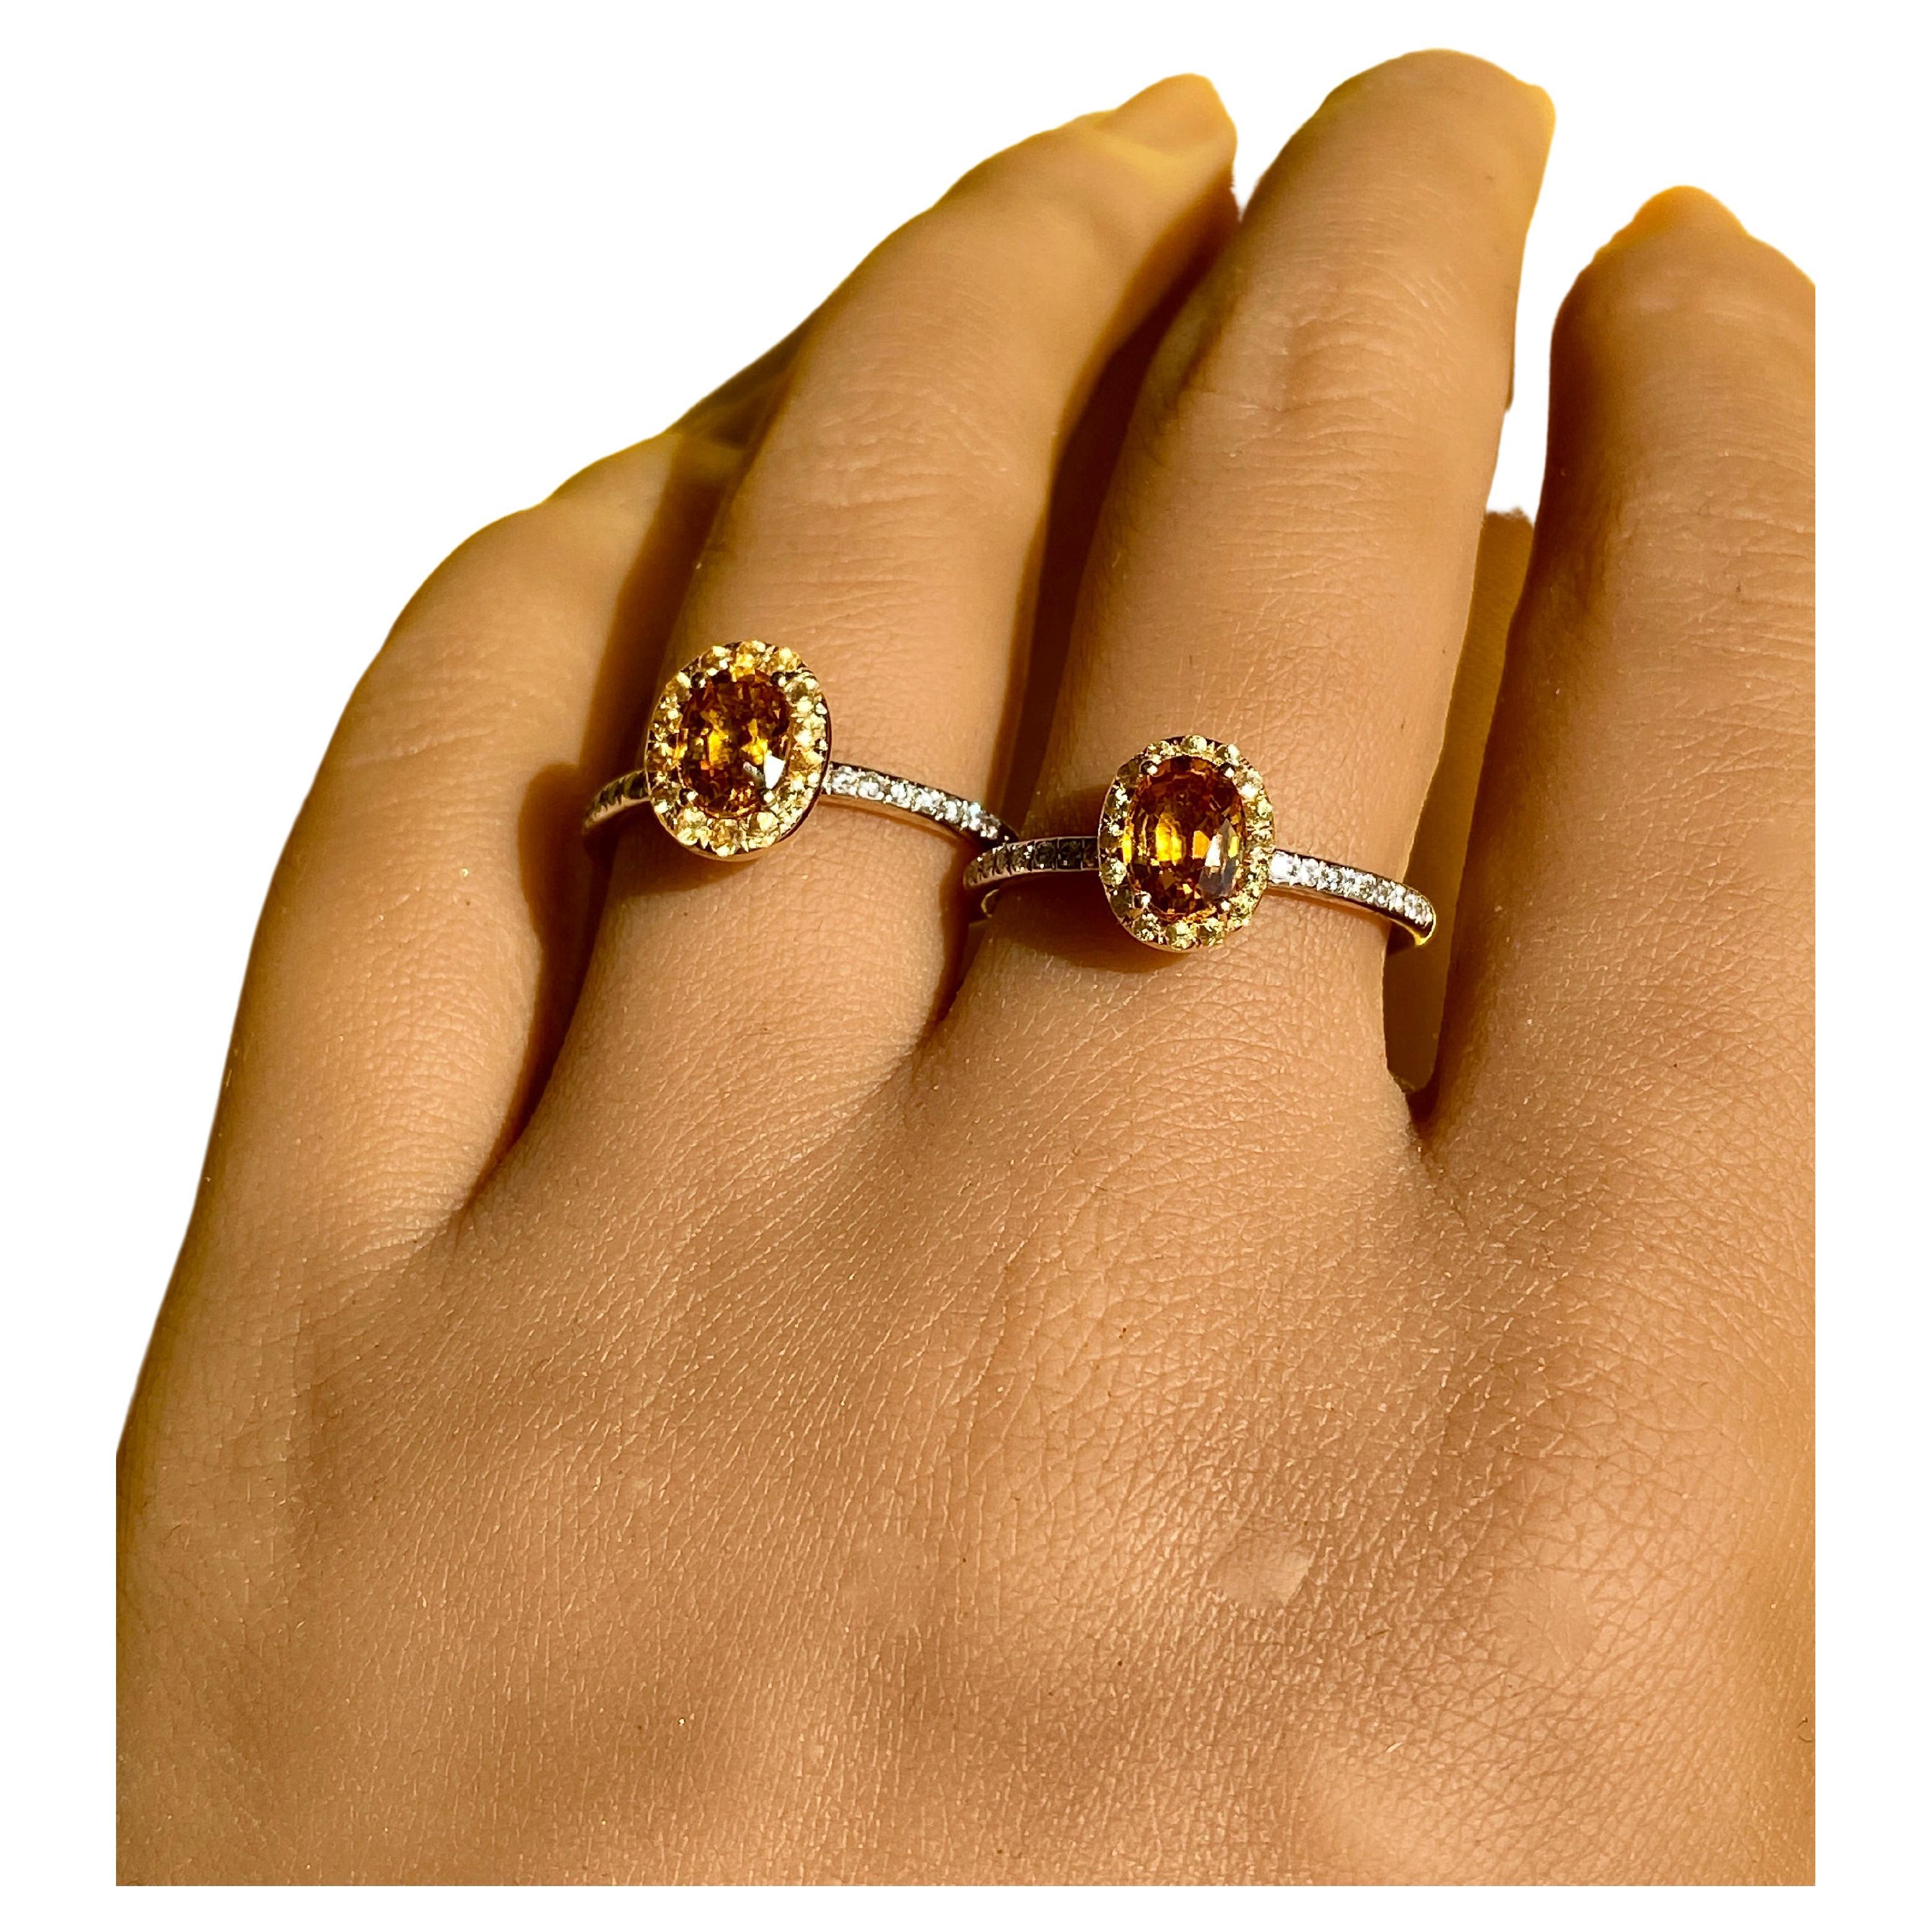 Yellow Sapphire and Diamond Solitaire Ring with Natural Gemstones in 14k Gold